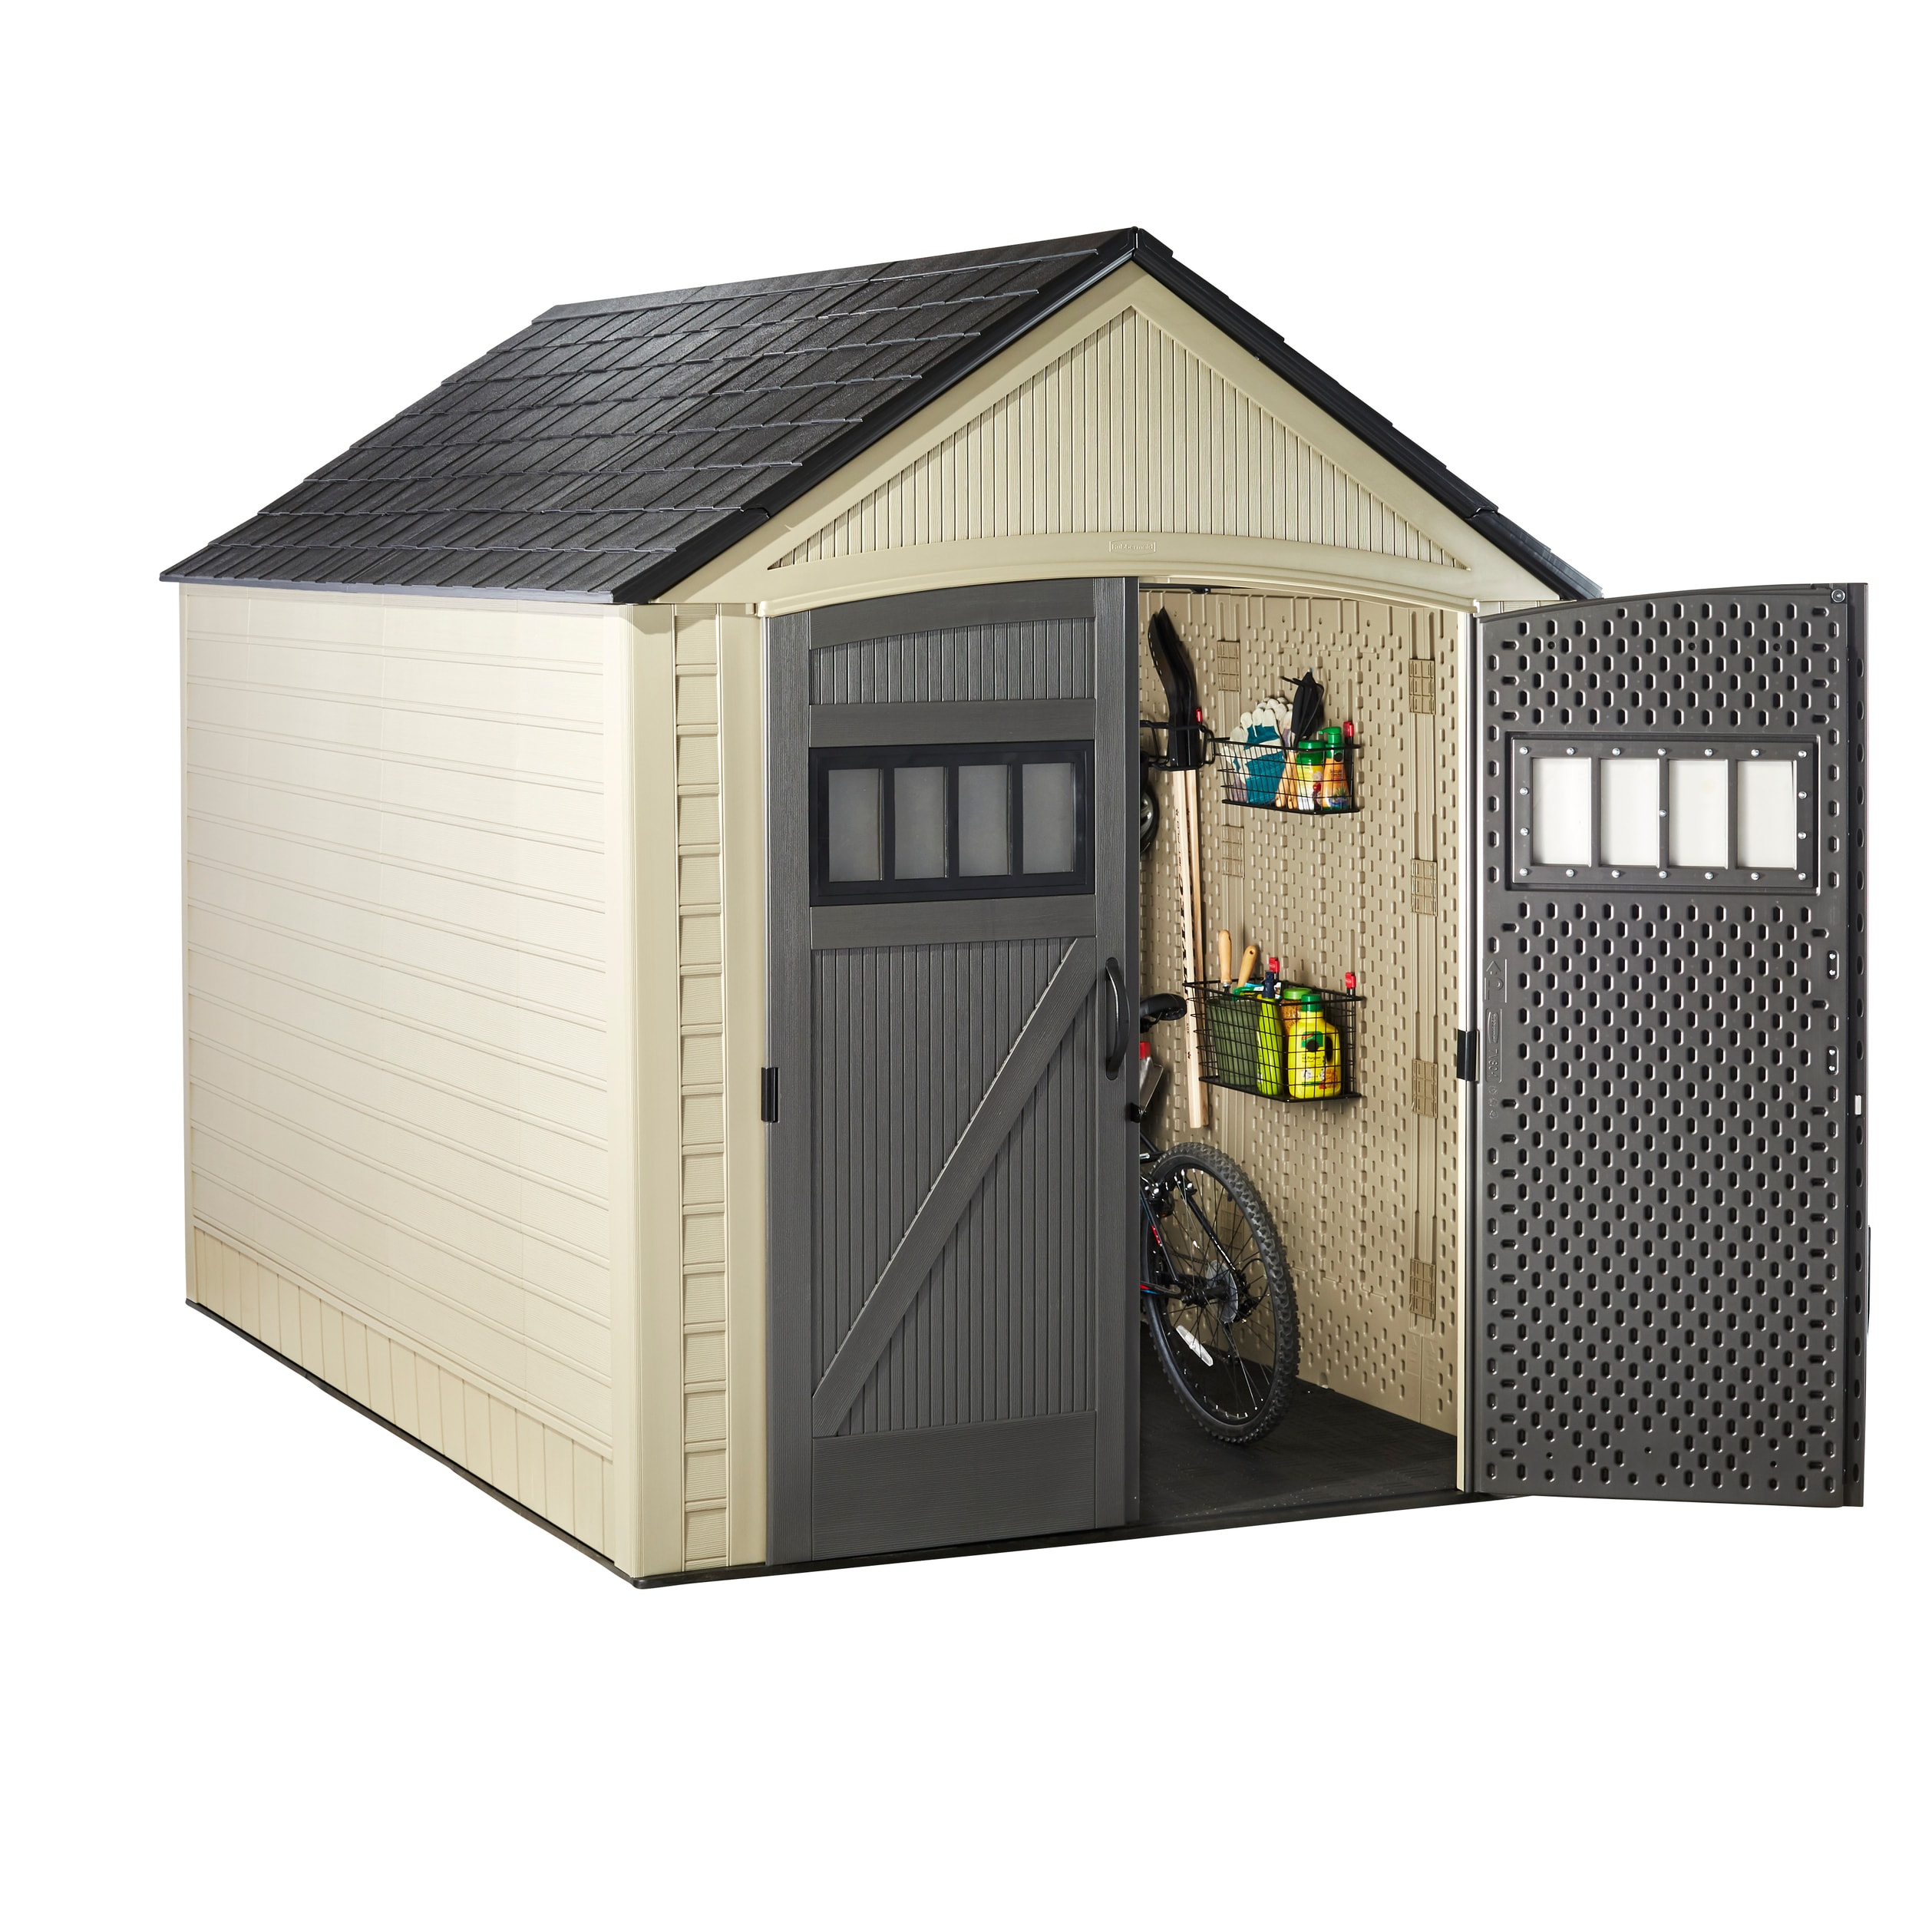 Rubbermaid Roughneck Storage Sheds - complete honest review!